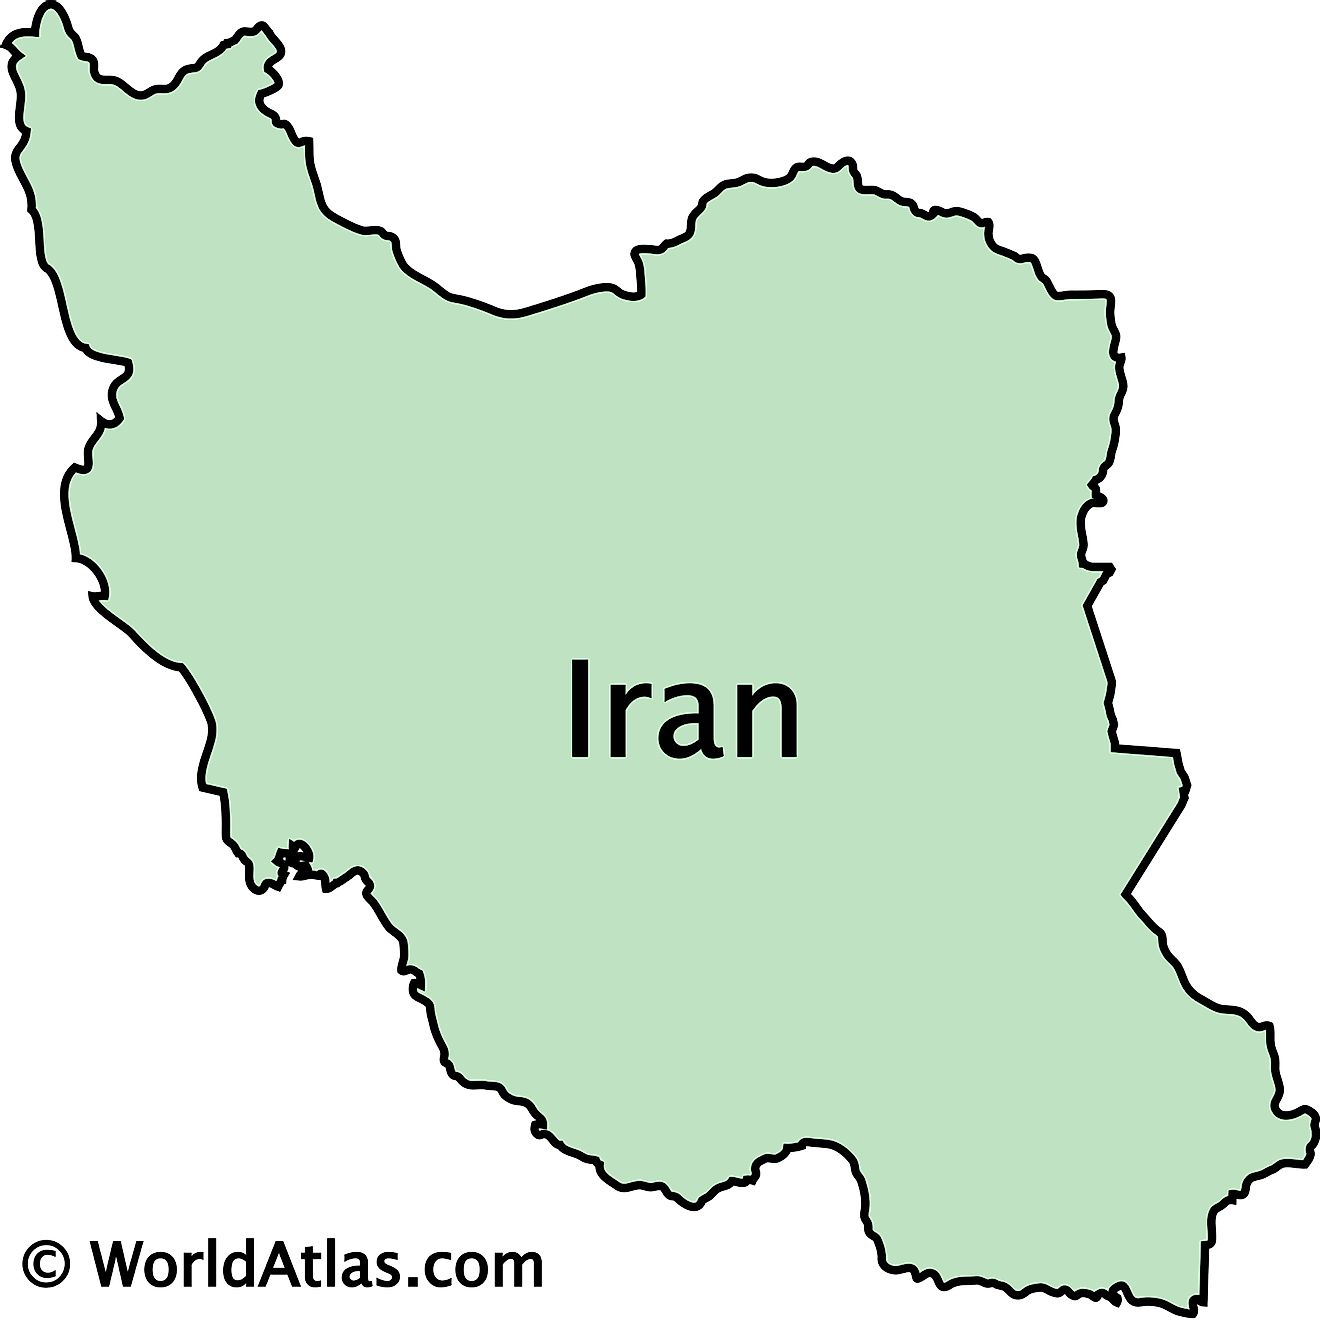 Outline Map of Iran